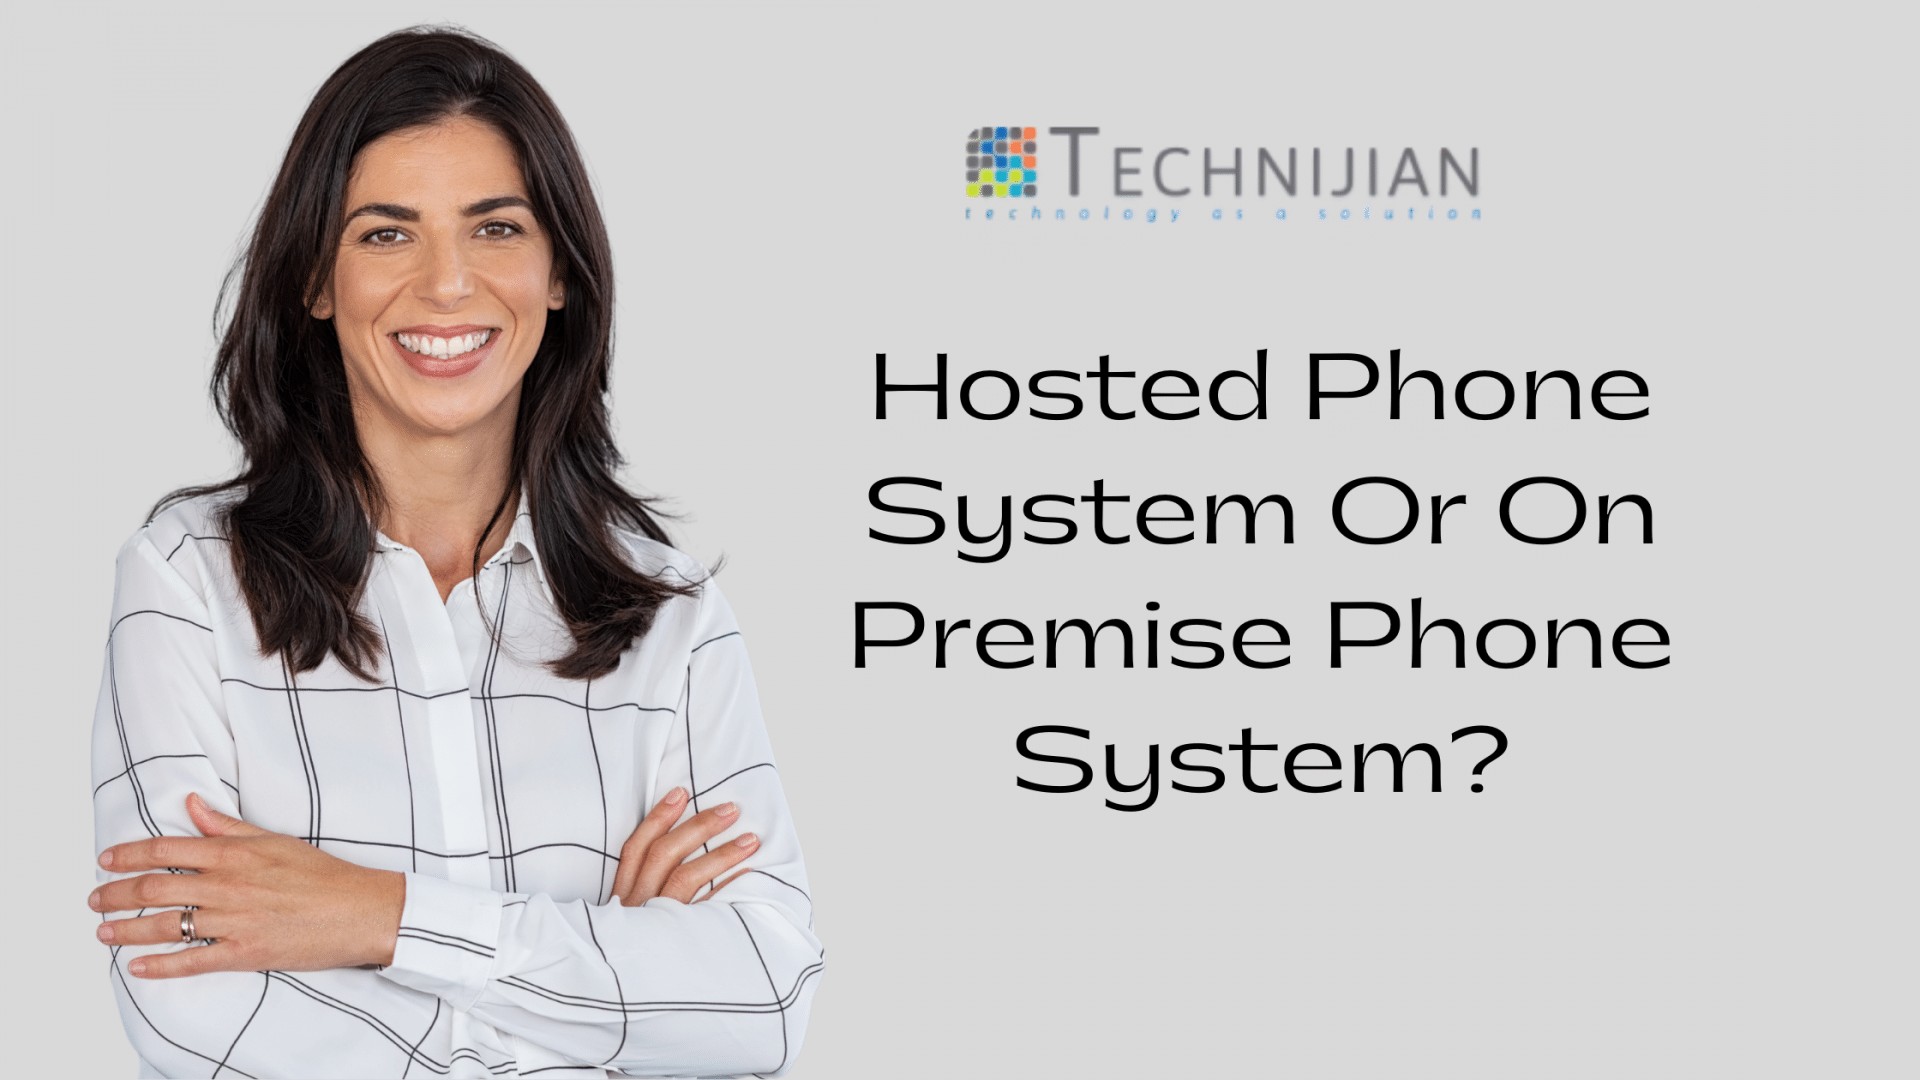 Hosted Phone System Or On Premise Phone System_